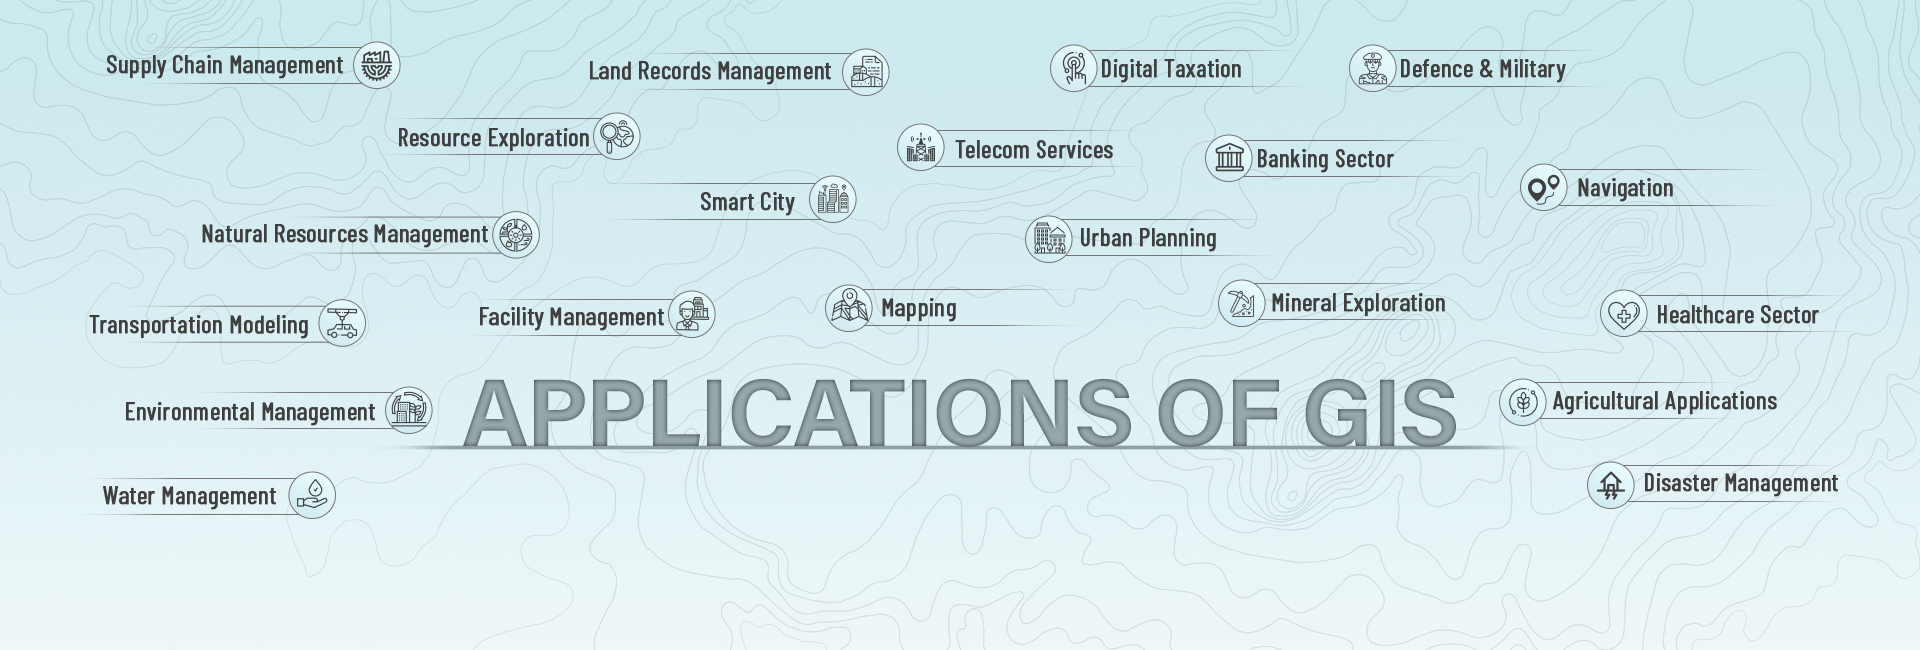 Important Applications of GIS